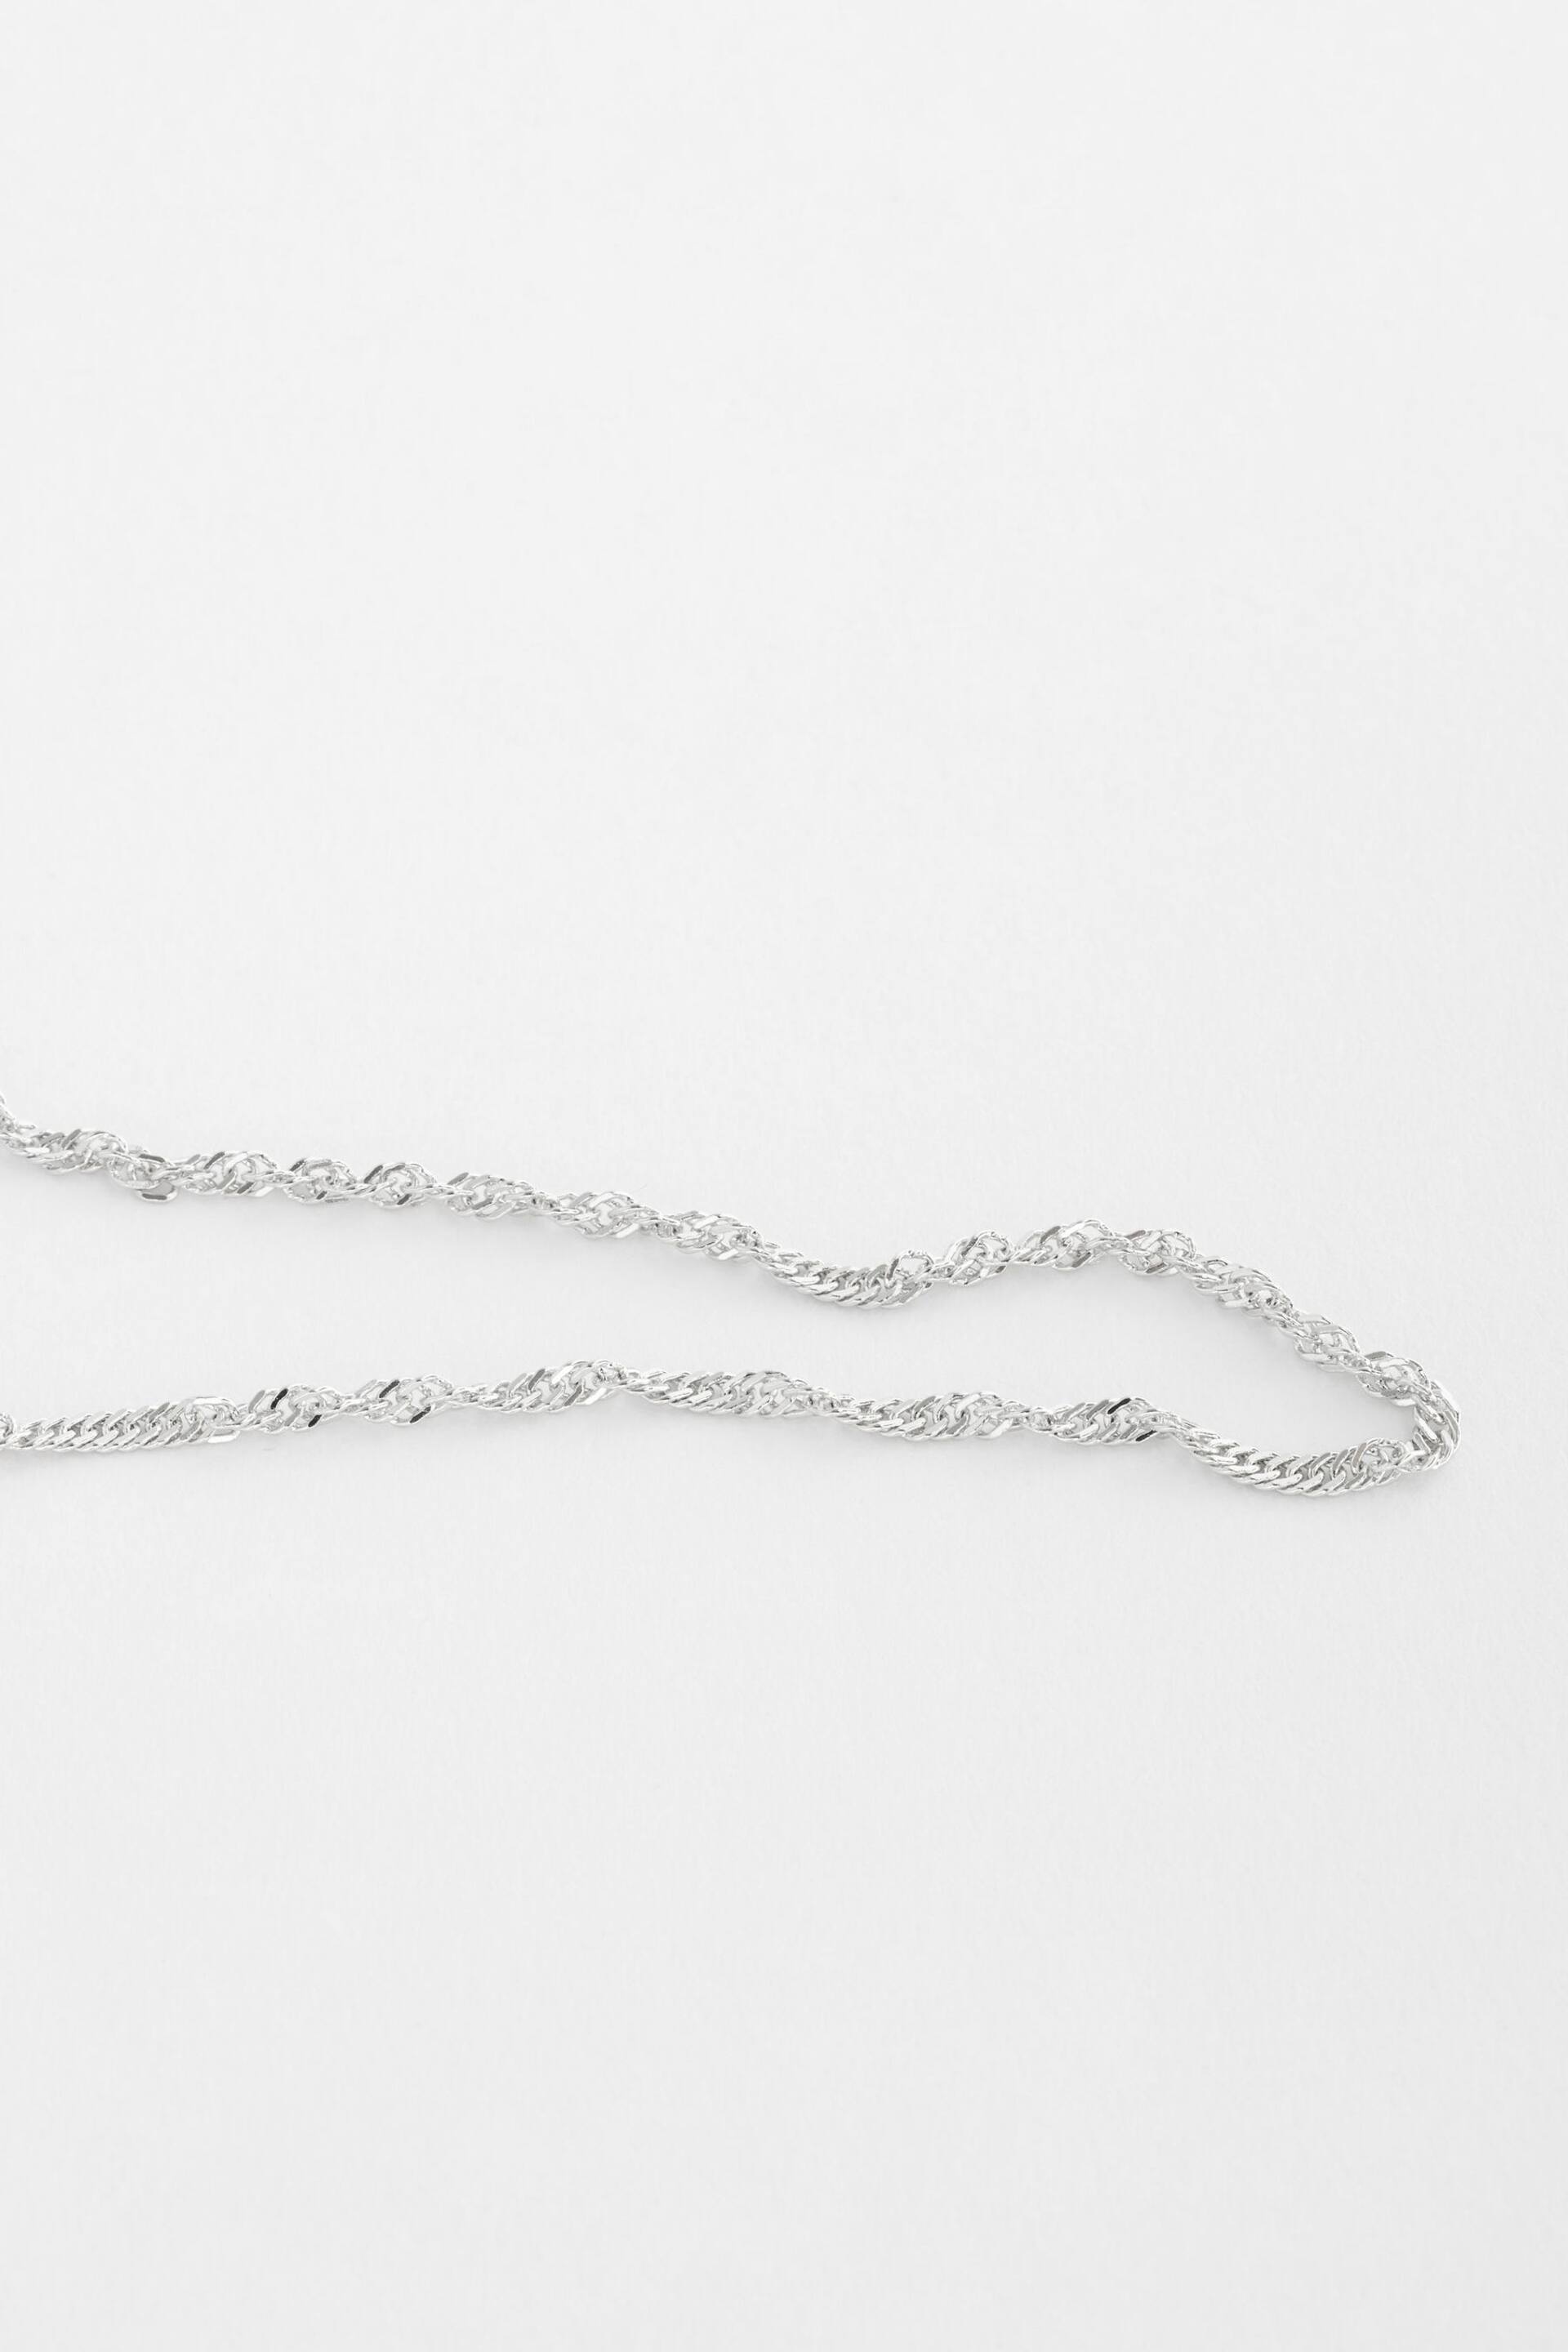 Sterling Silver Twisted Chain Anklet - Image 5 of 10